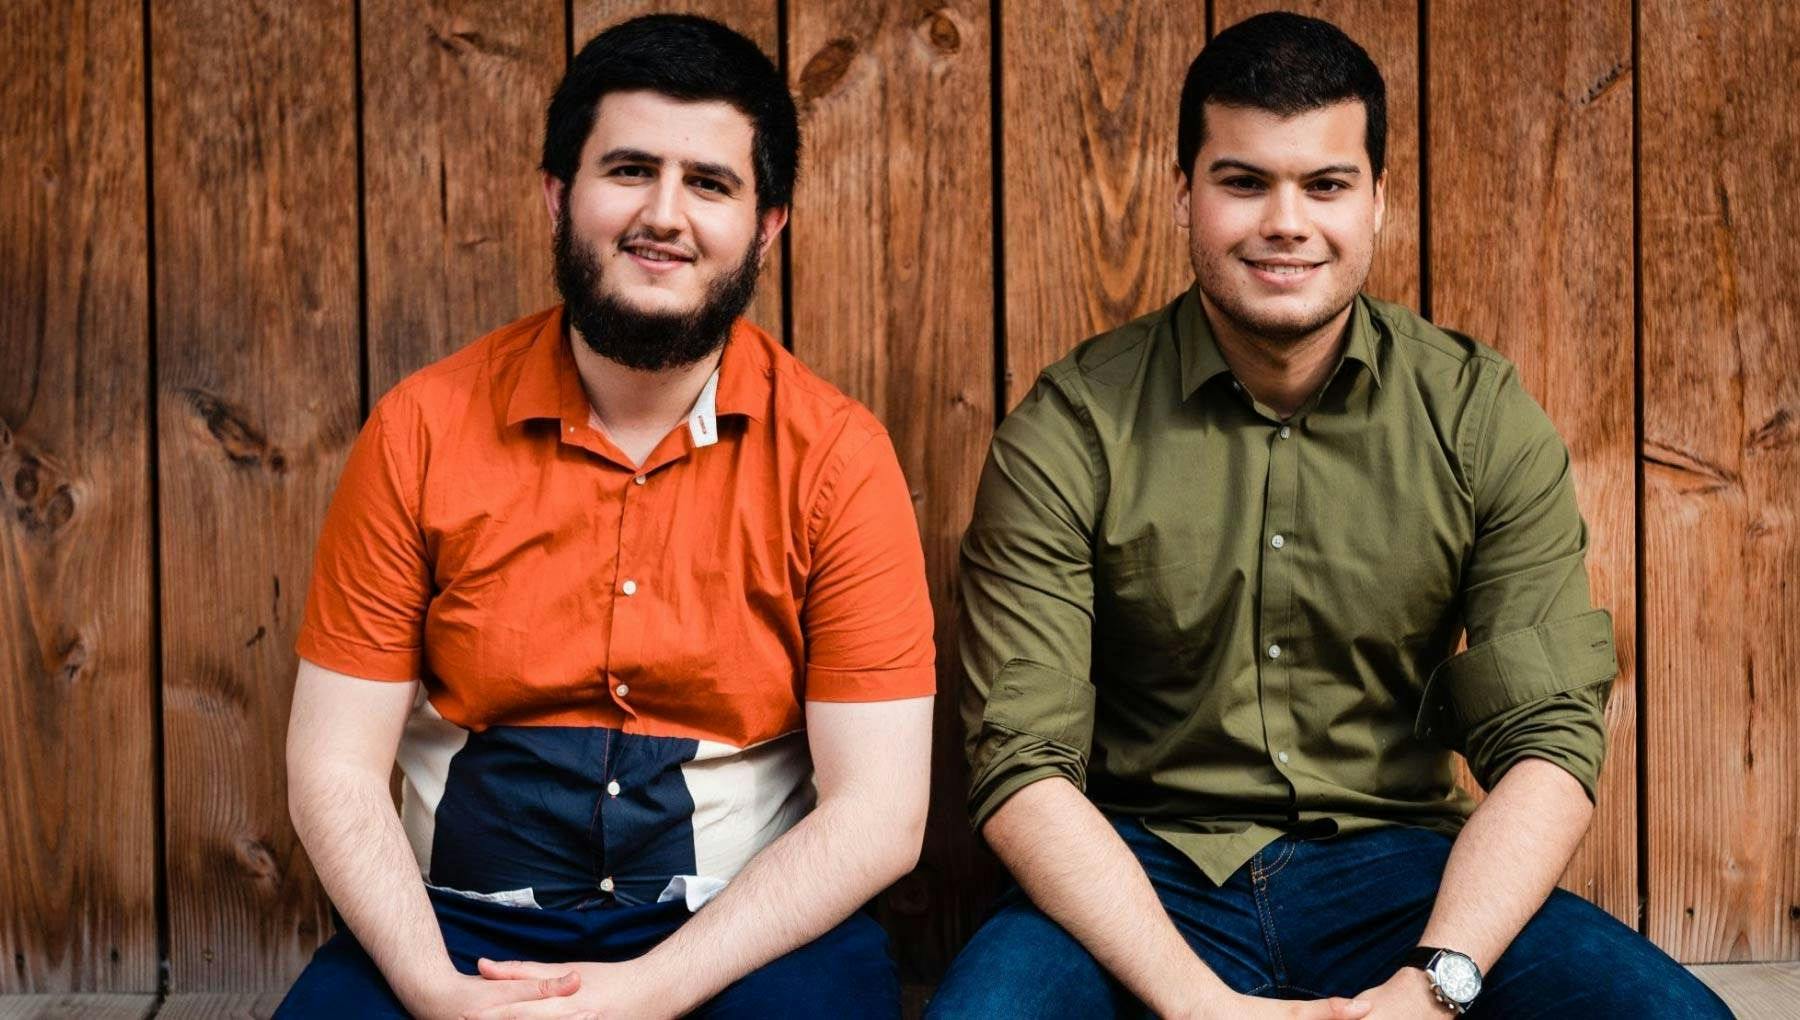 Landscape portrait of Adil Ayi and Marwan el Morabet, co-founders of Omnia, sitting with hands in laps against wooden wall.